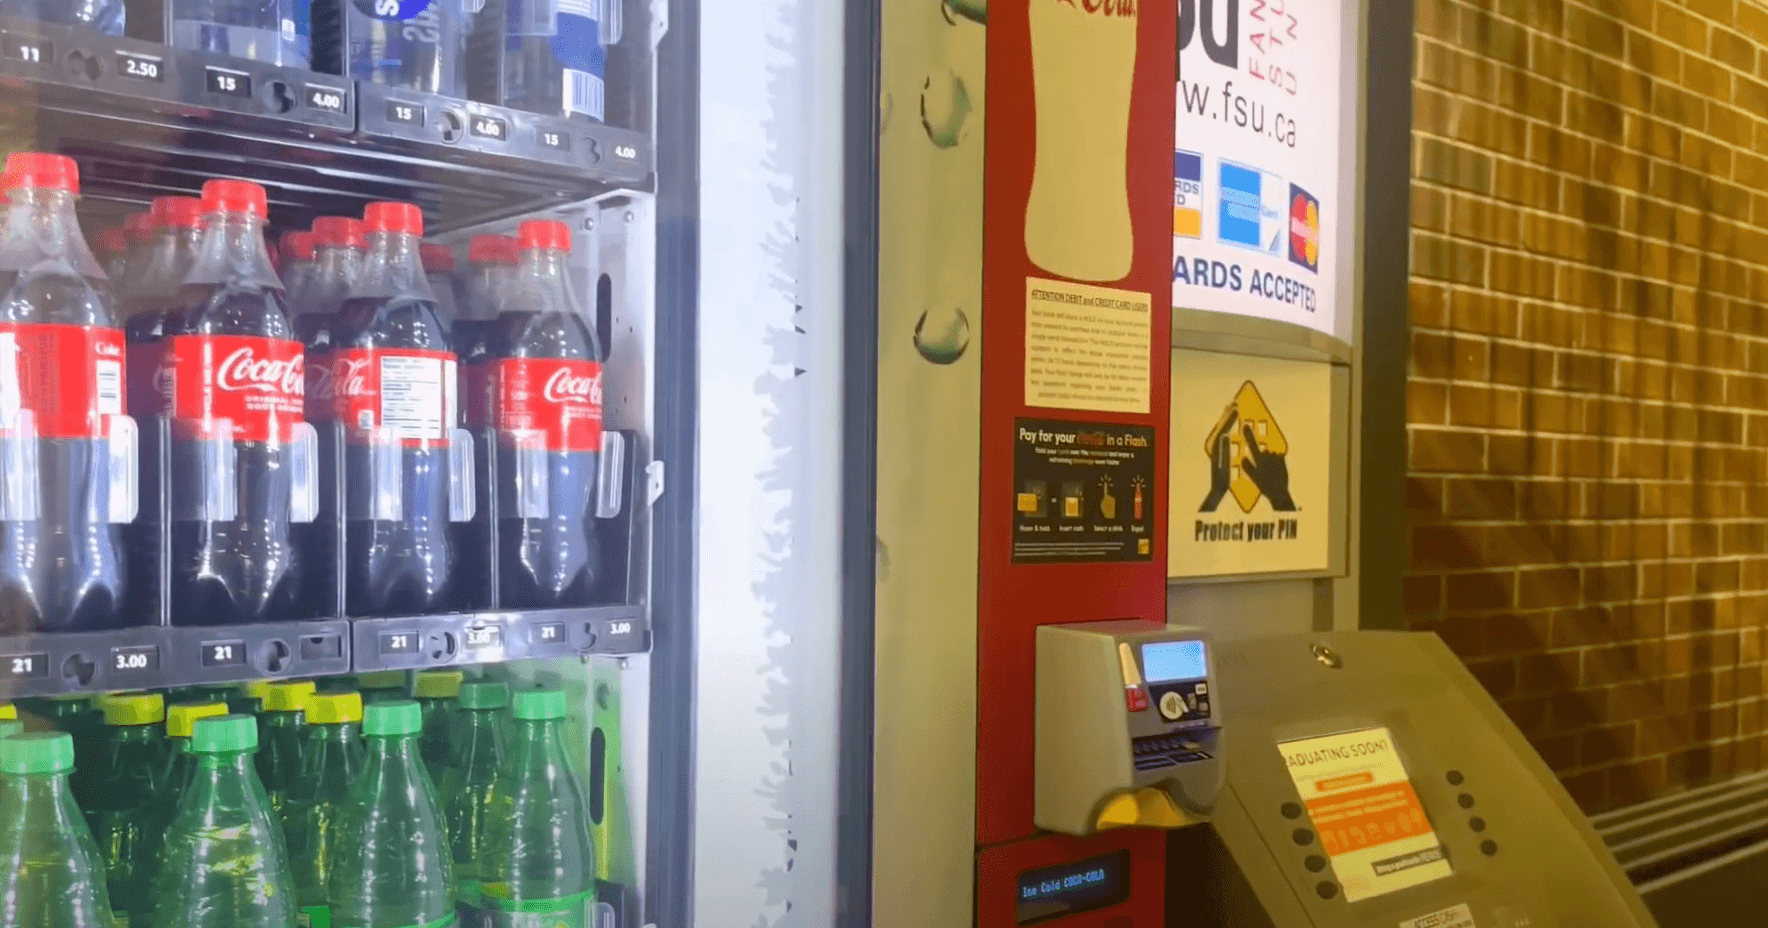 How to Use the Cash App Card on Vending Machine